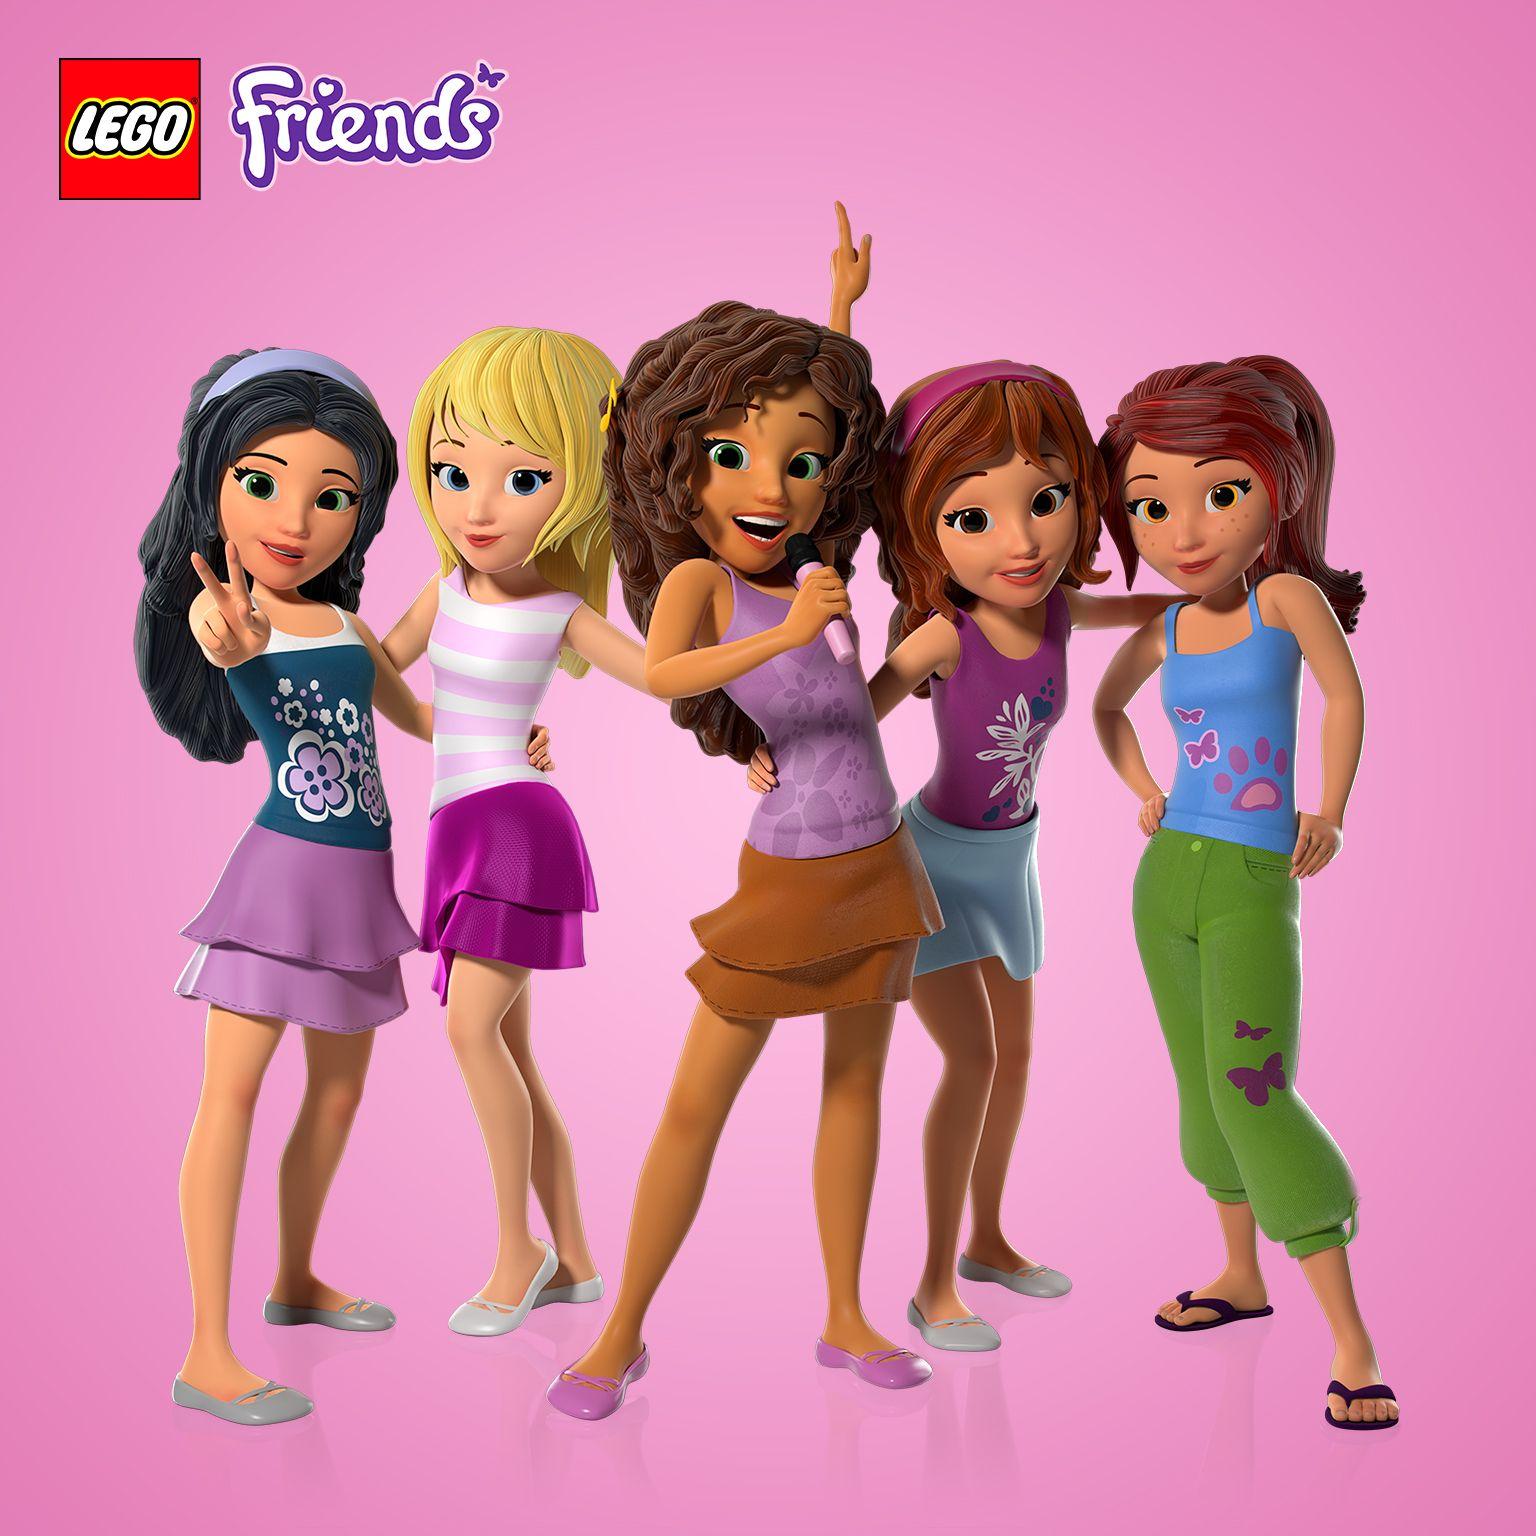 Lego Friends Wallpapers - Top Free Lego Friends Backgrounds ...